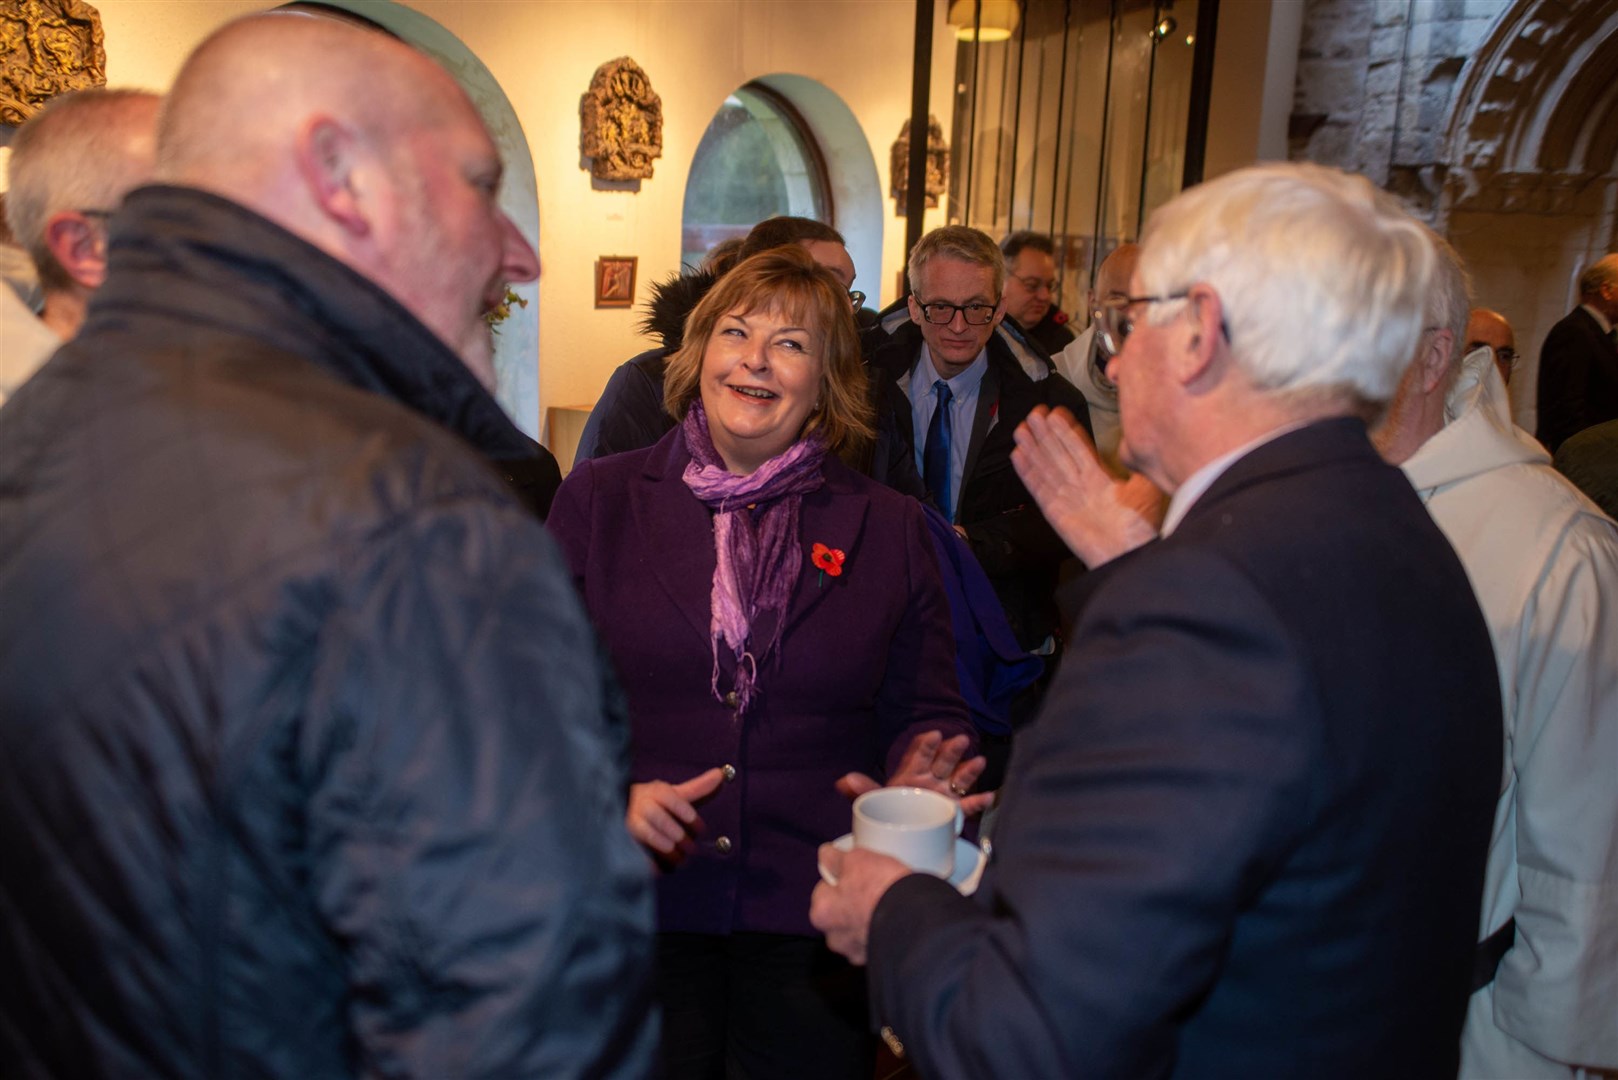 The Tourism Secretary Fiona Hyslop visits Pluscarden Abbey near Elgin. Photo by: Michael Traill